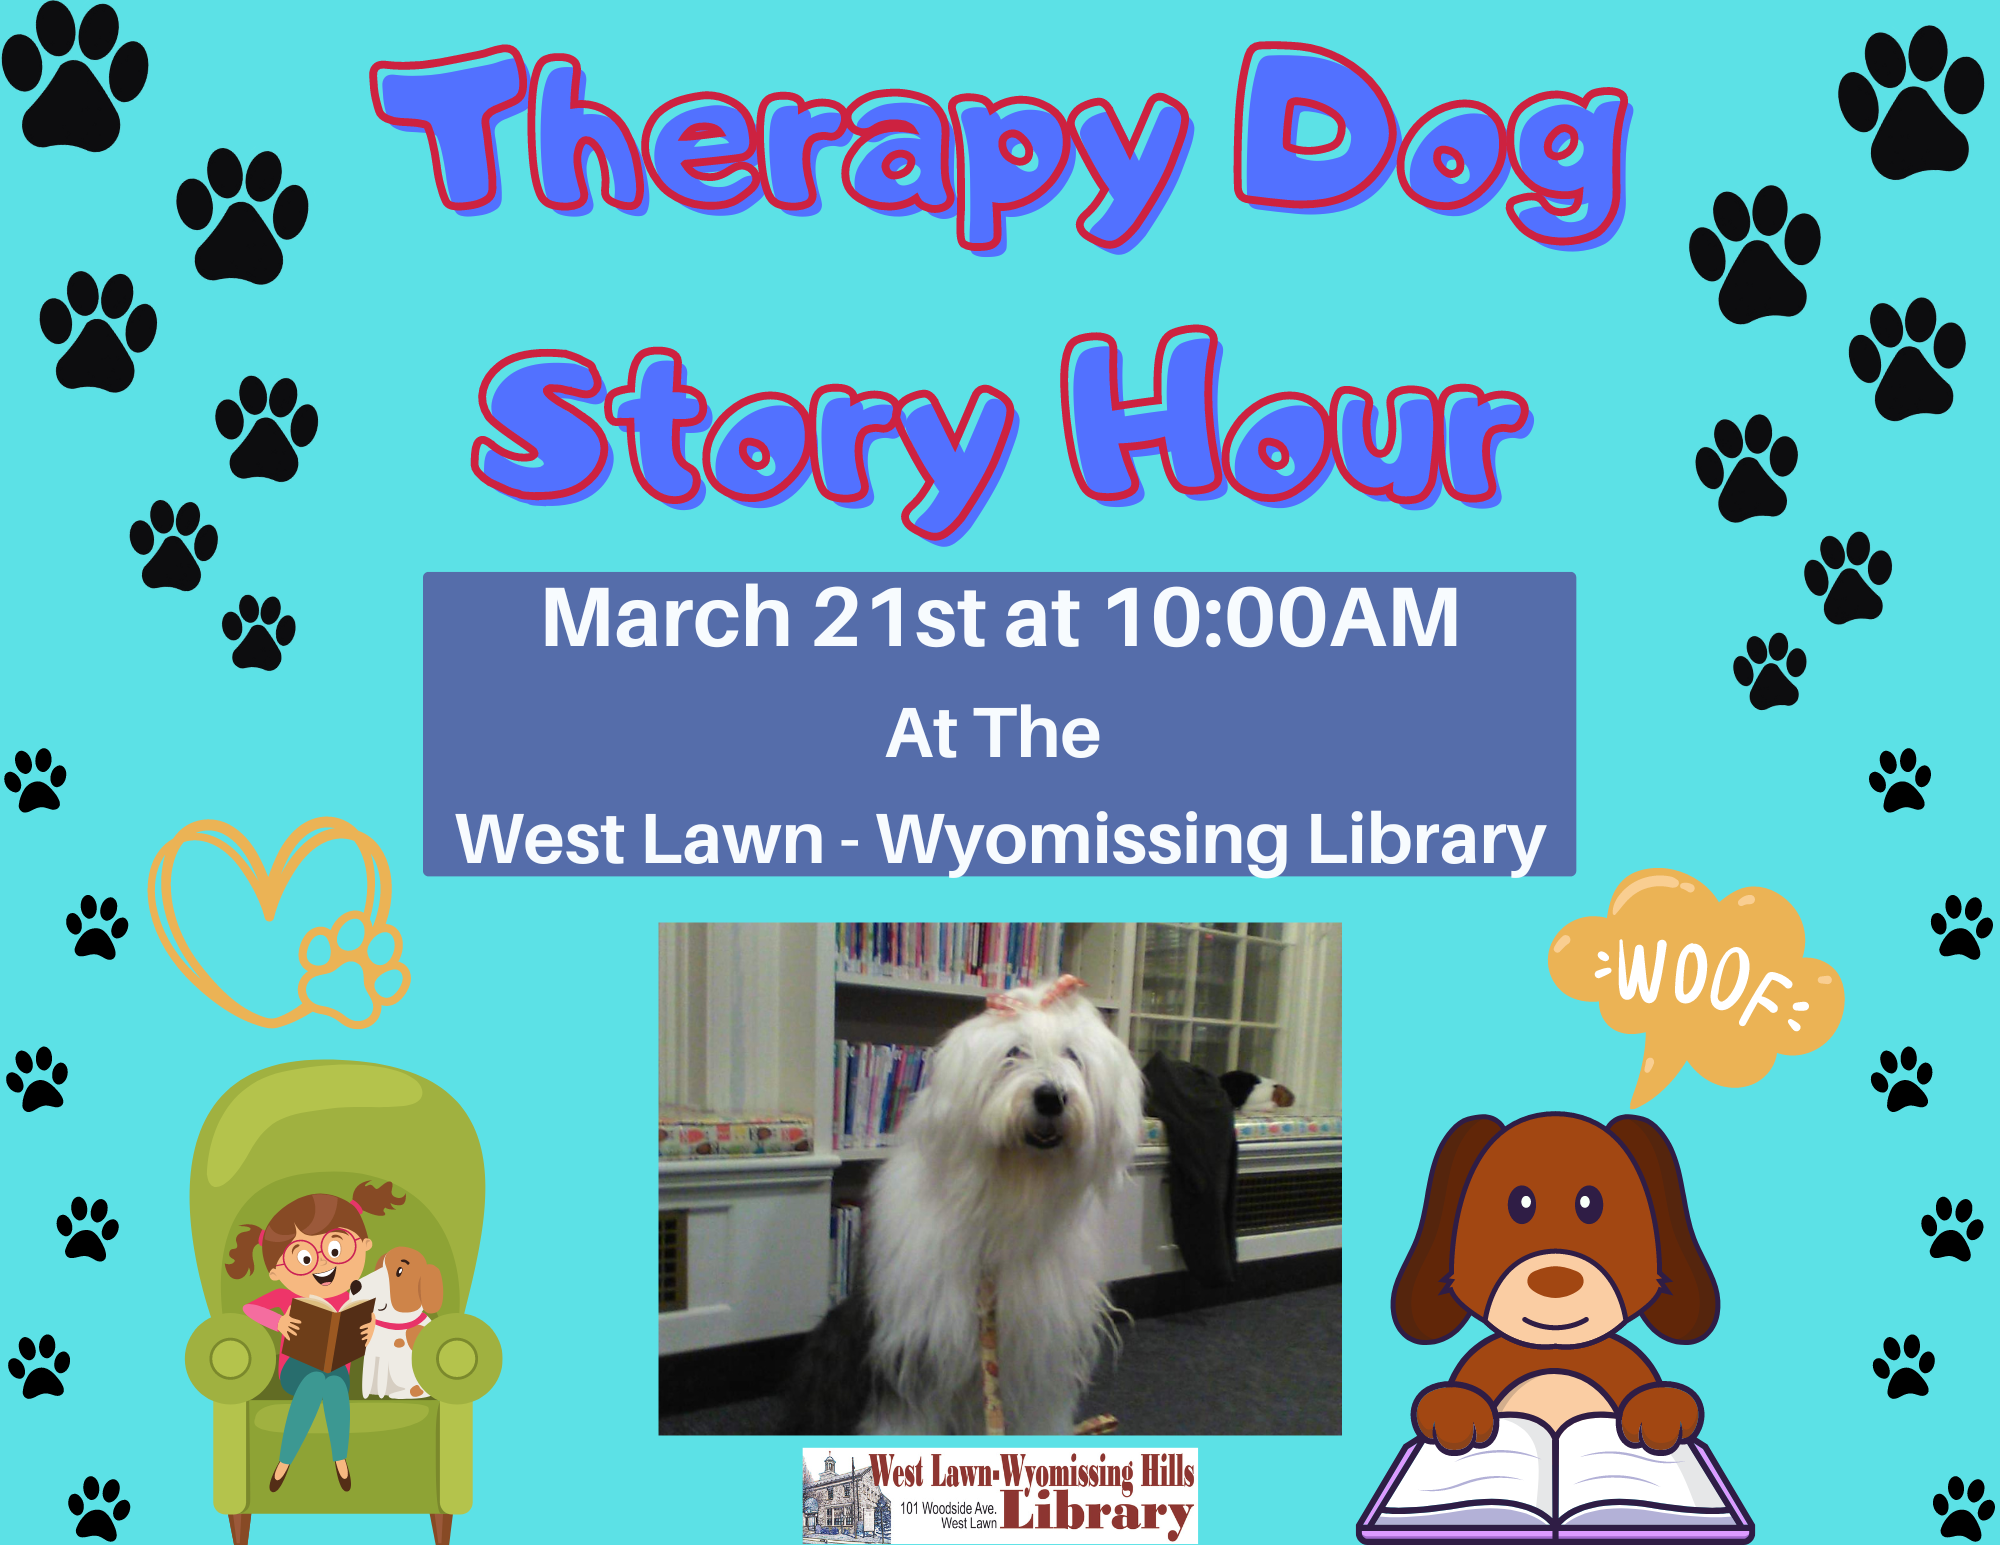 Reading to therapy dogs improves kids' literacy skills and boosts confidence!  Bring your young readers by the West Lawn Wyomissing Hills Library to practice reading to our friendly, trained, and certified therapy dogs.